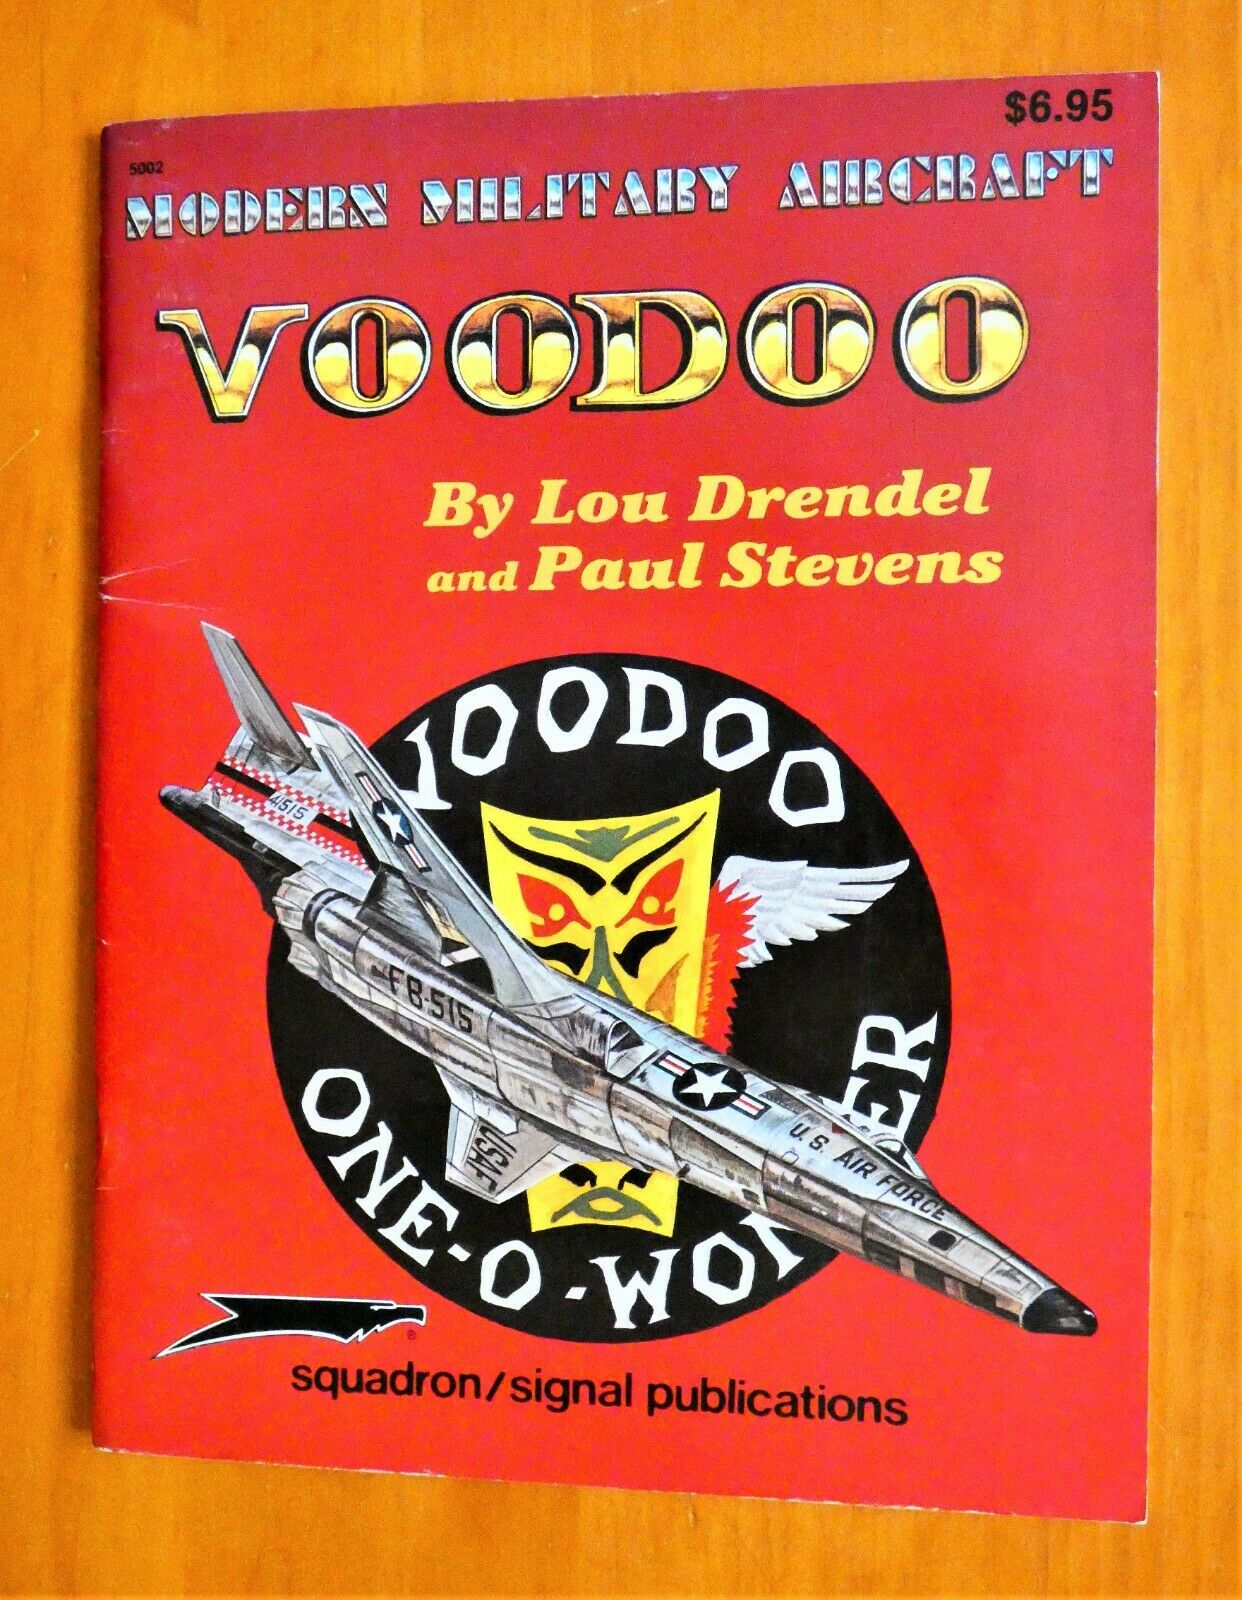 Voodoo Modern Military Aircraft Squadron Signal Publication 5002 By Lou Drendel